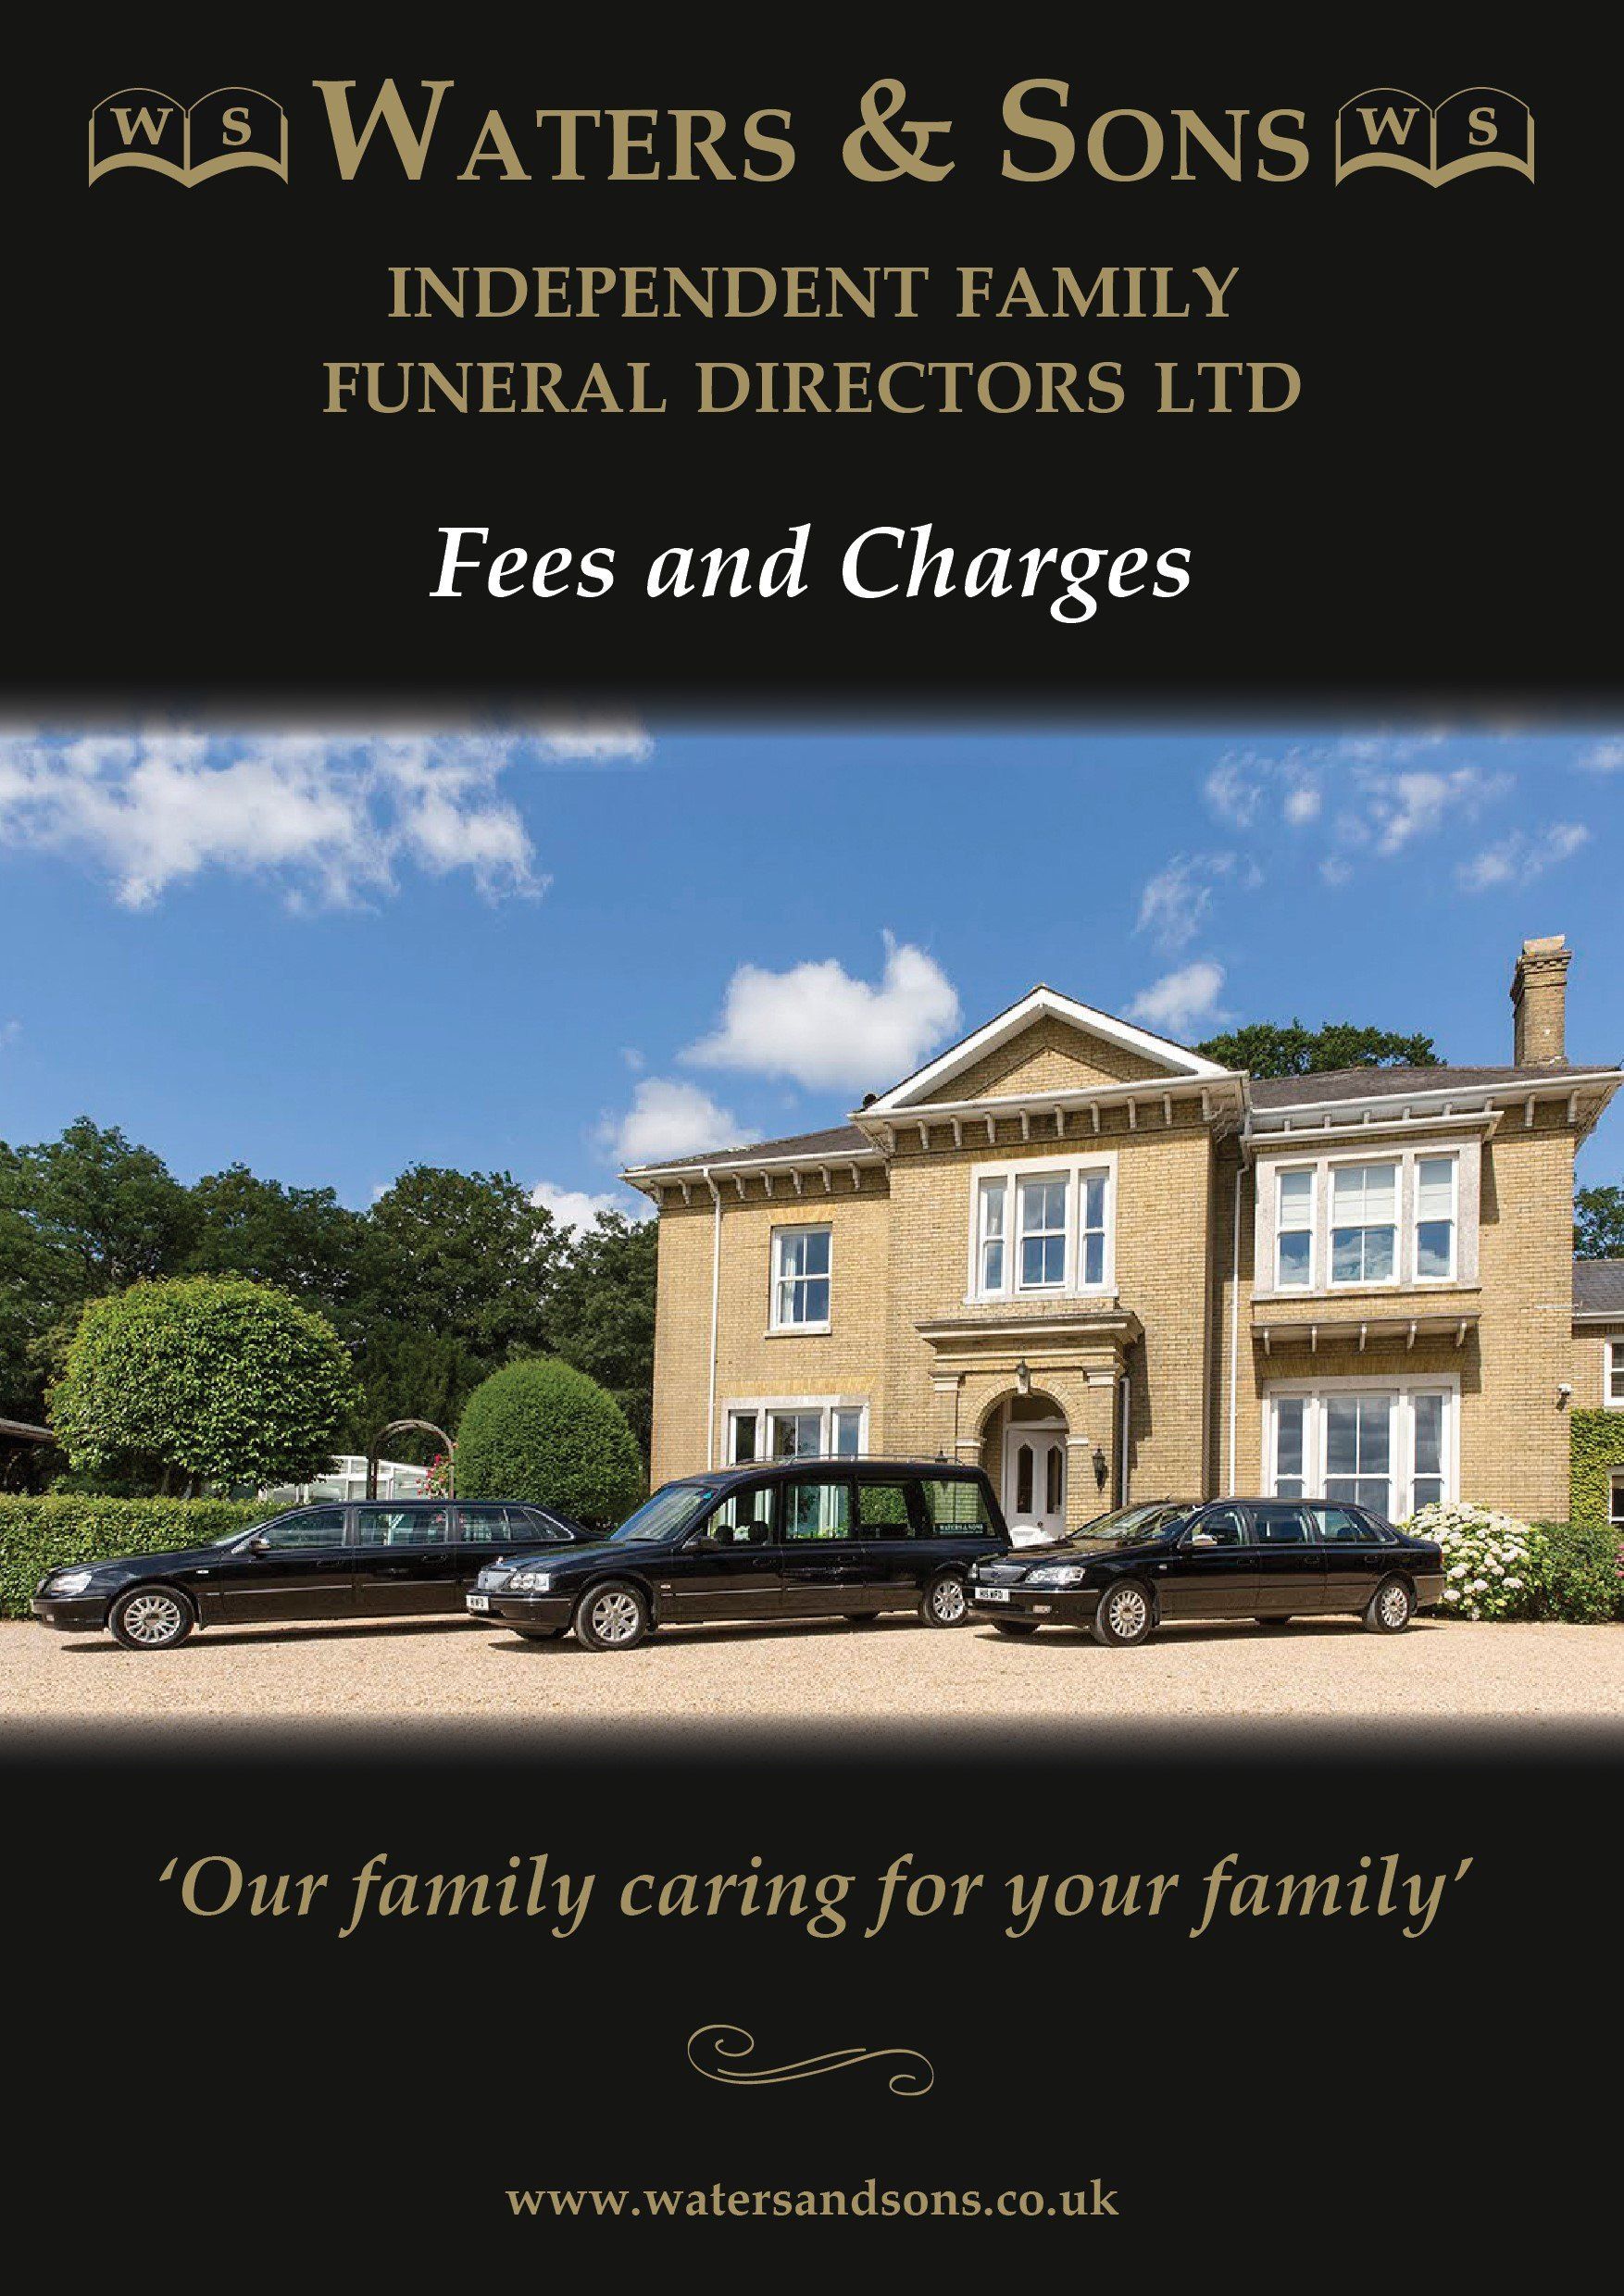 Our Fee's & Charges Brochure